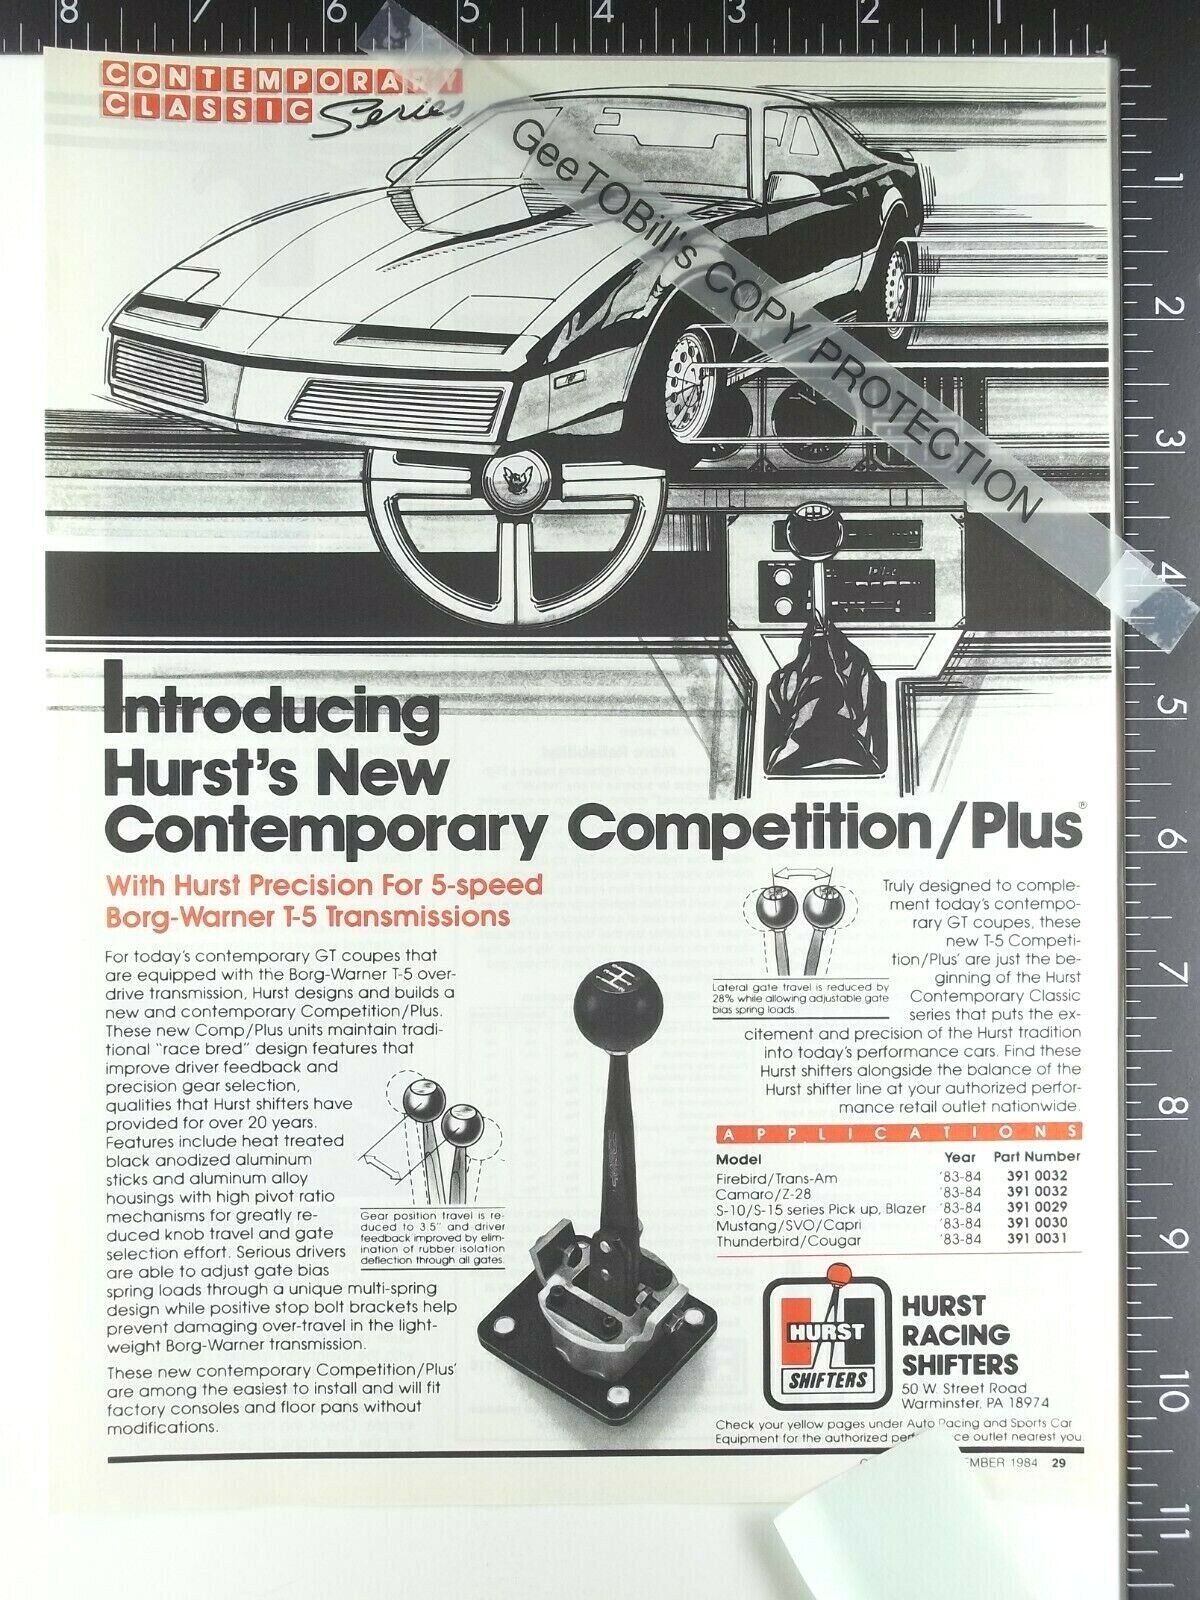 1984 Ad For Hurst Competition Plus 5-speed Shifter For Pontiac Firebird Trans-am